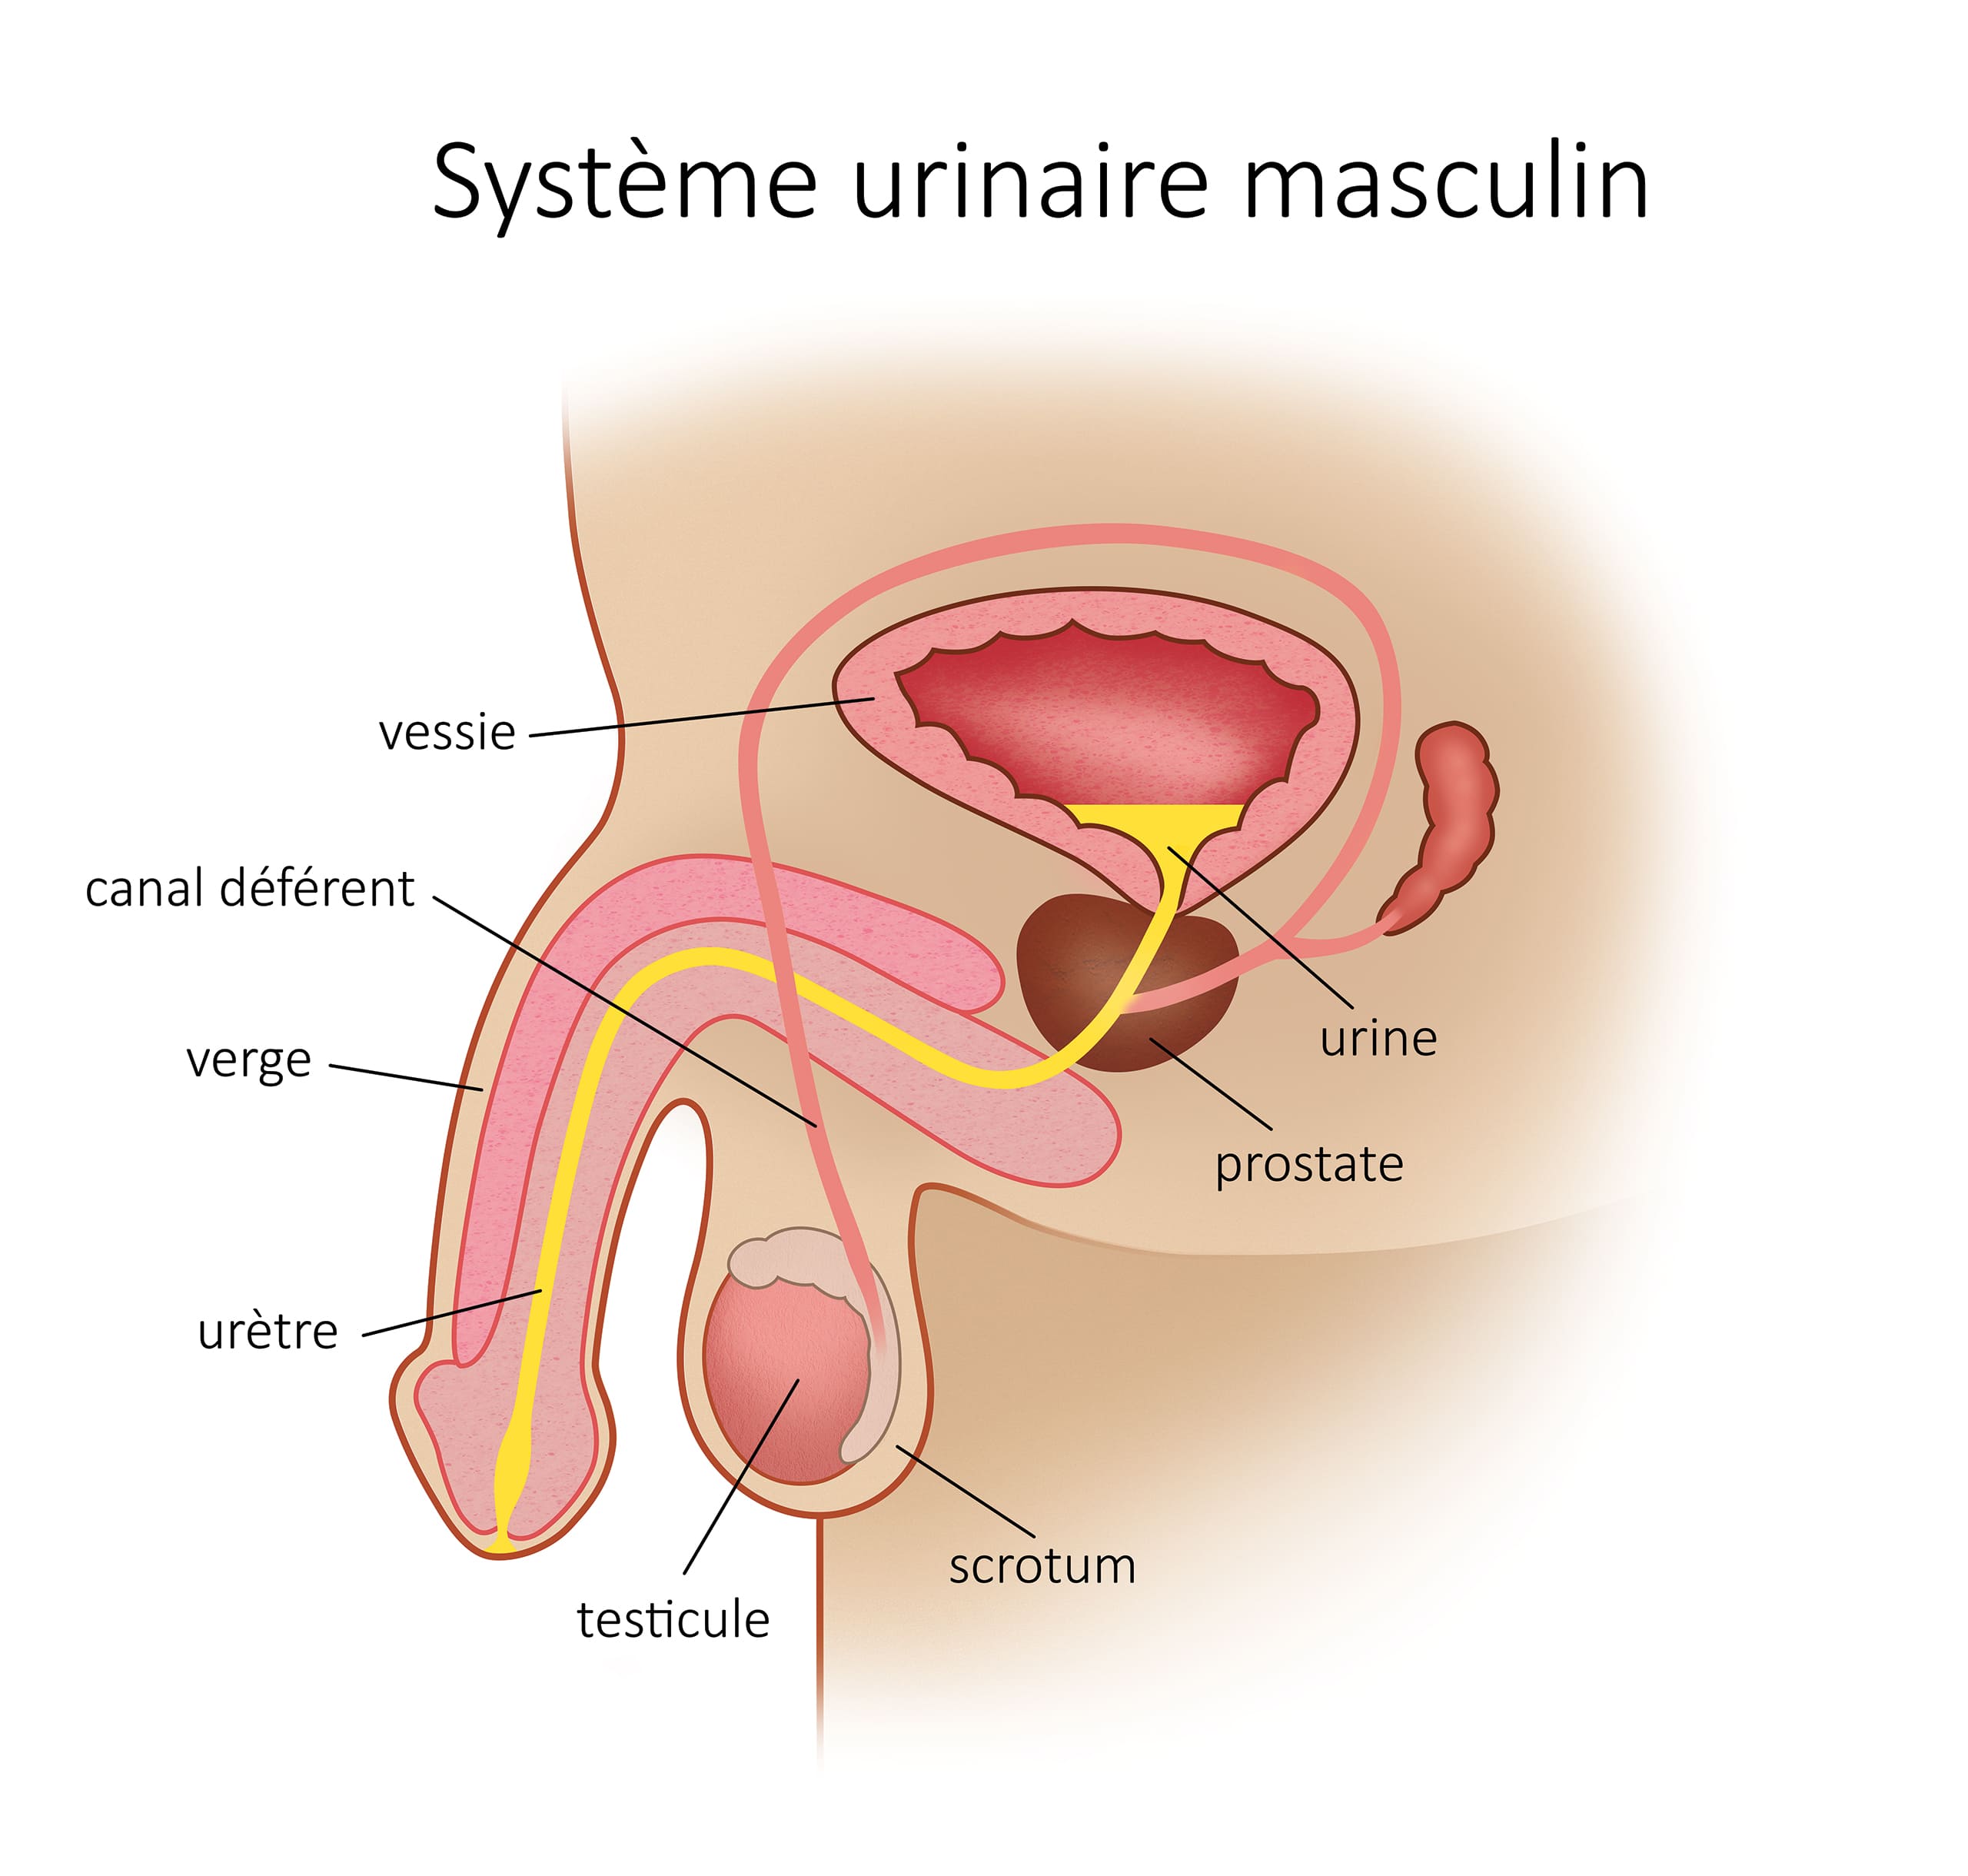 syst-urinaire-maculin